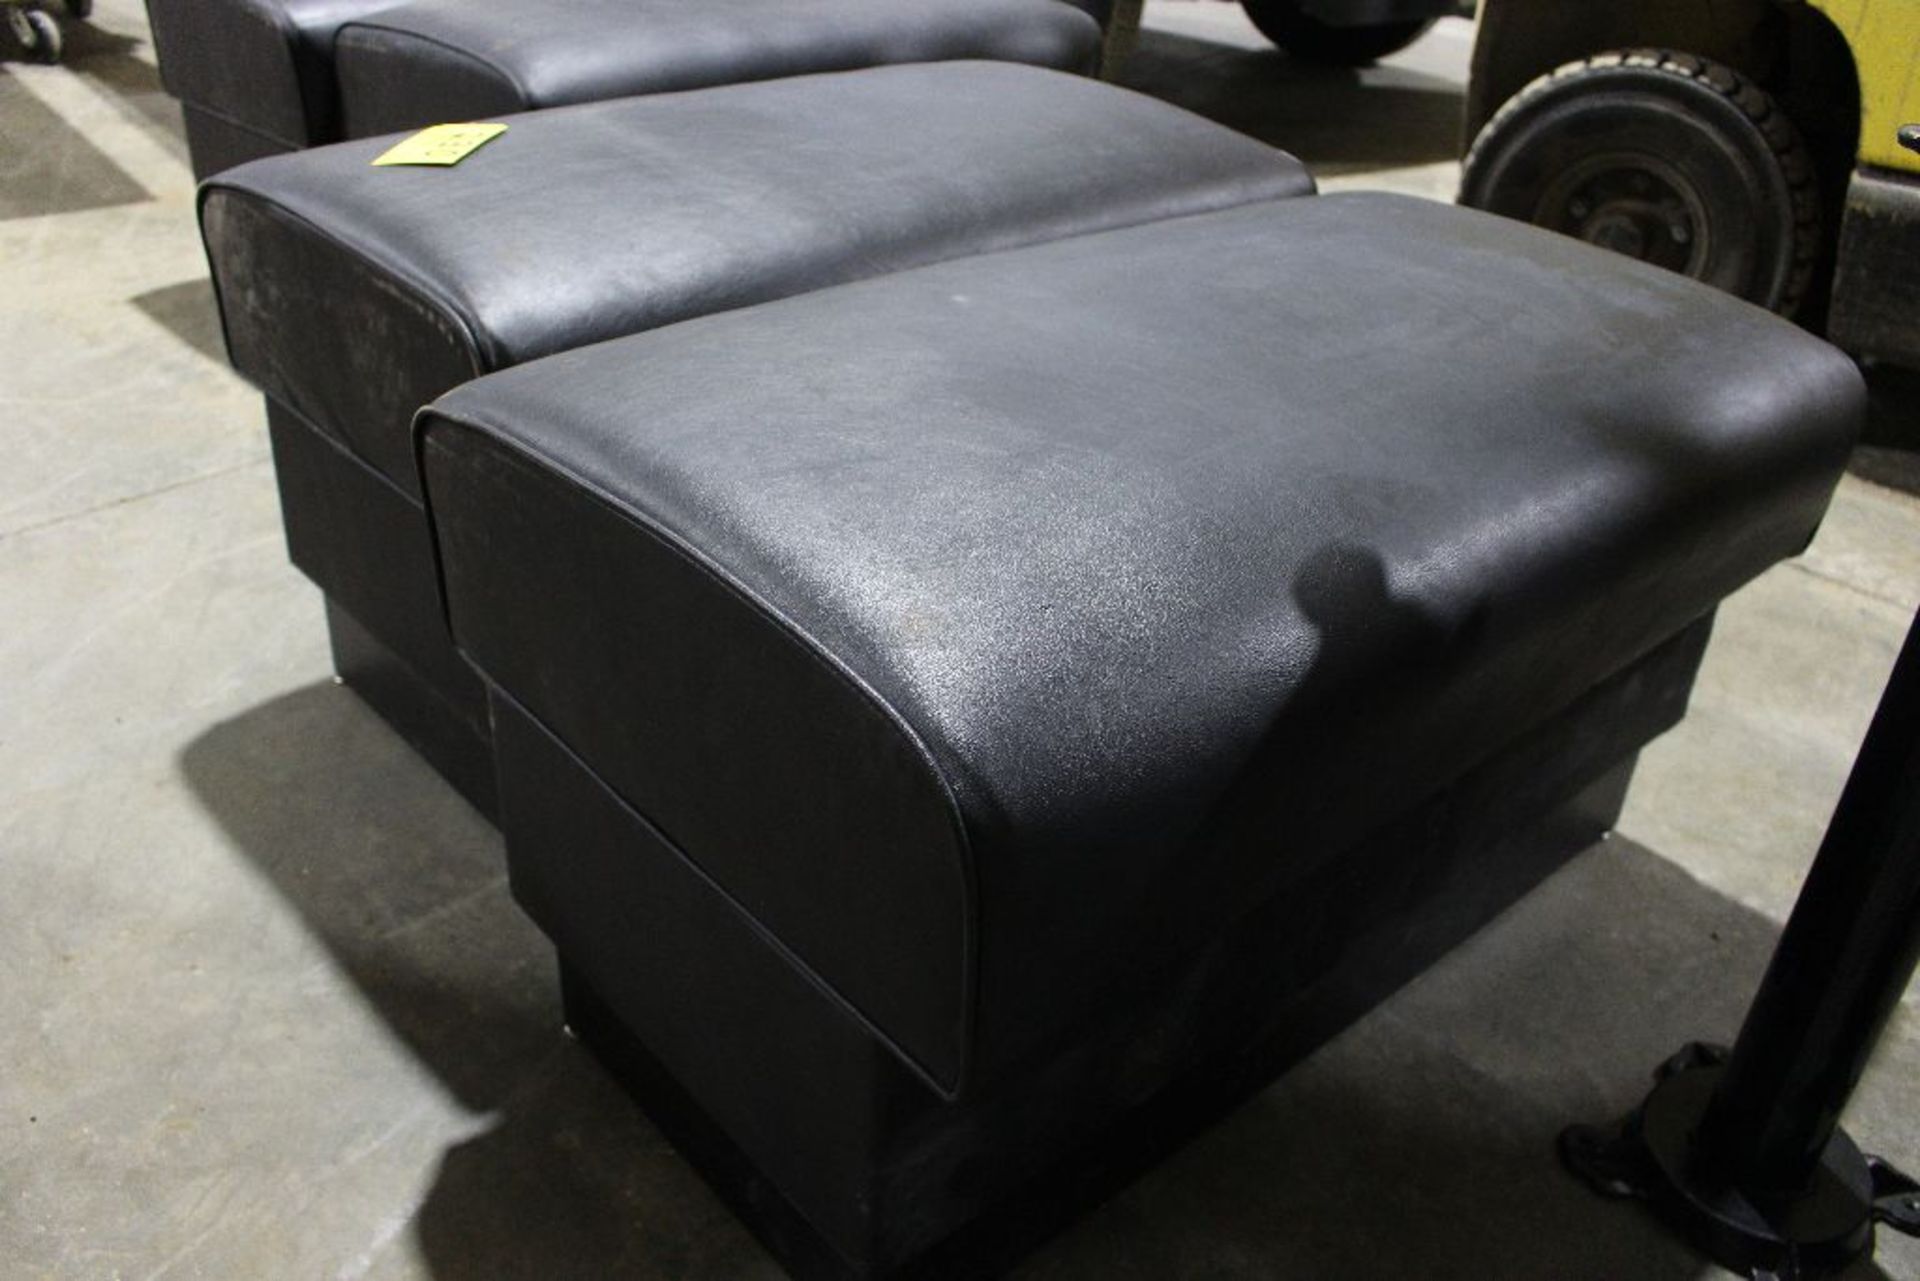 (2) Blackleather bench, 36" x 21" x 20". - Image 2 of 3